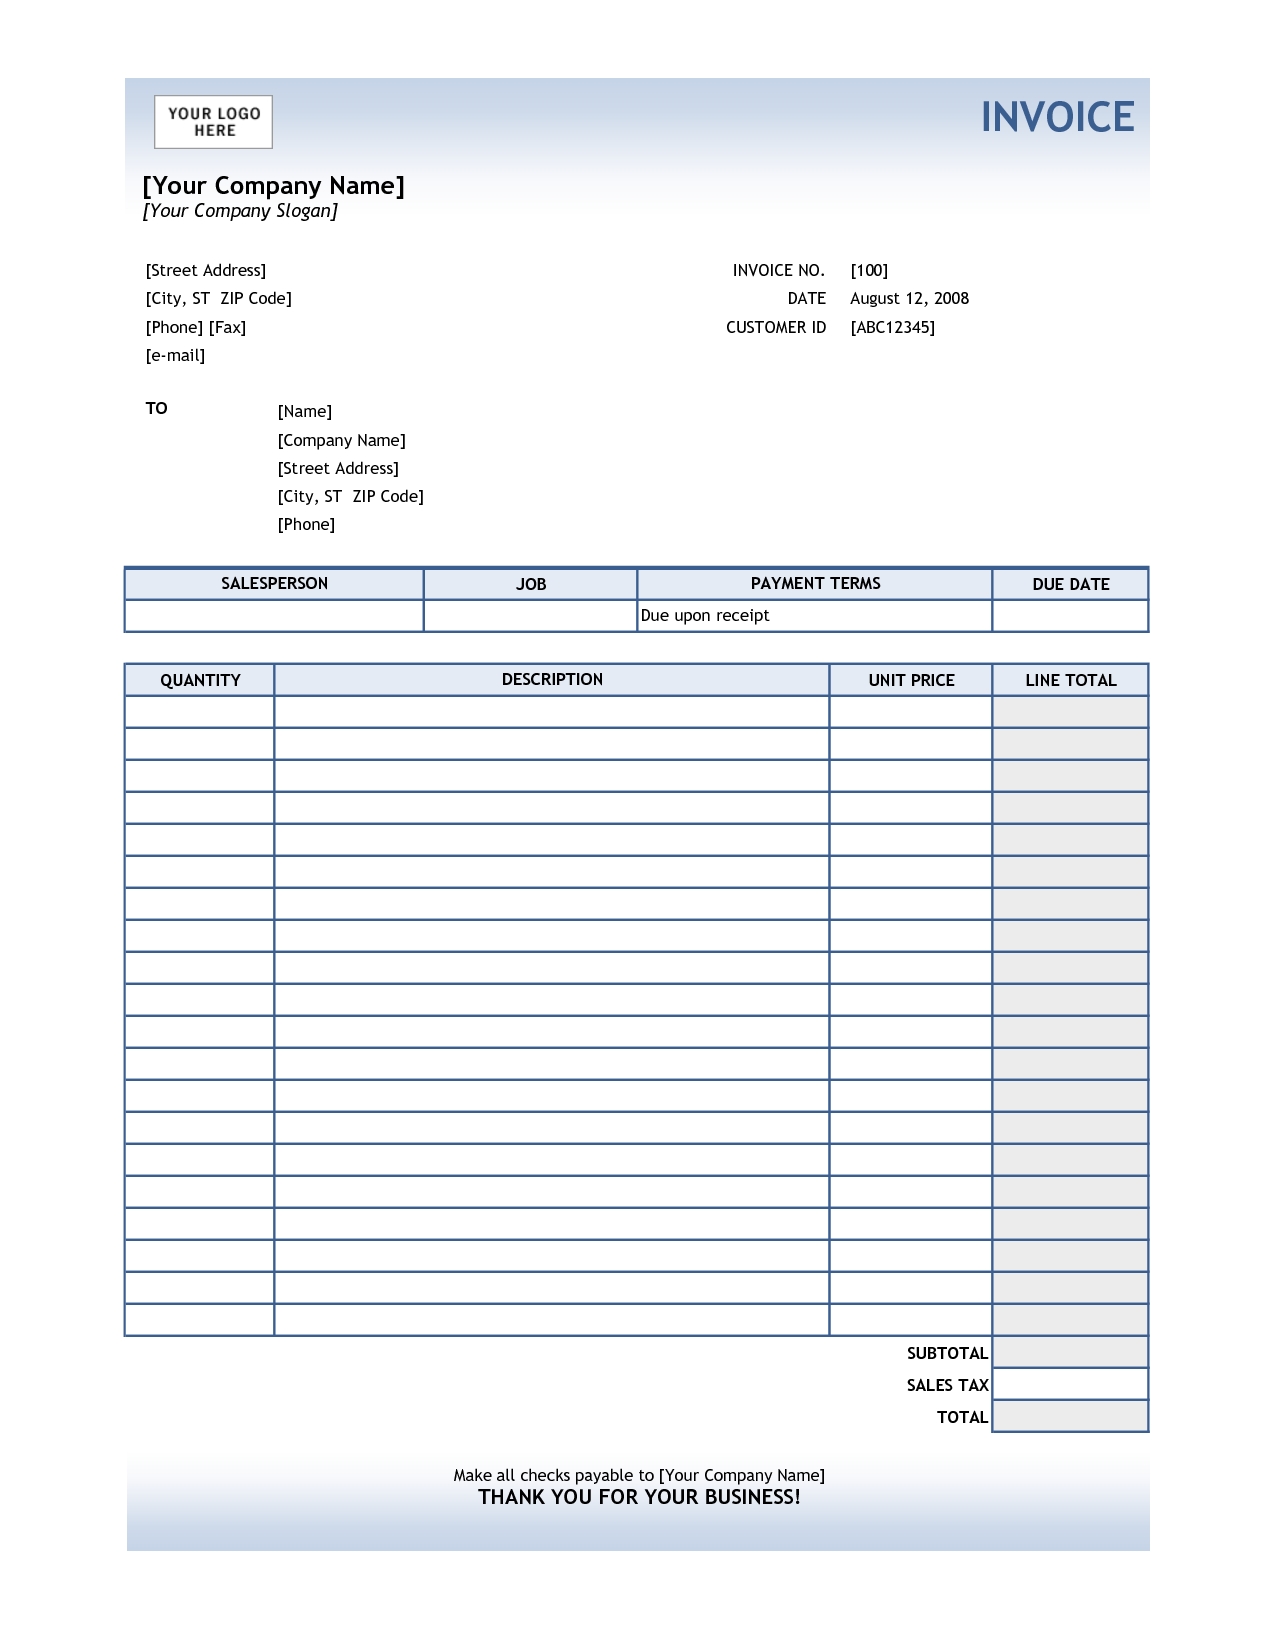 sample excel invoice free excel invoice templates smartsheet sample template uk comme 1275 X 1650